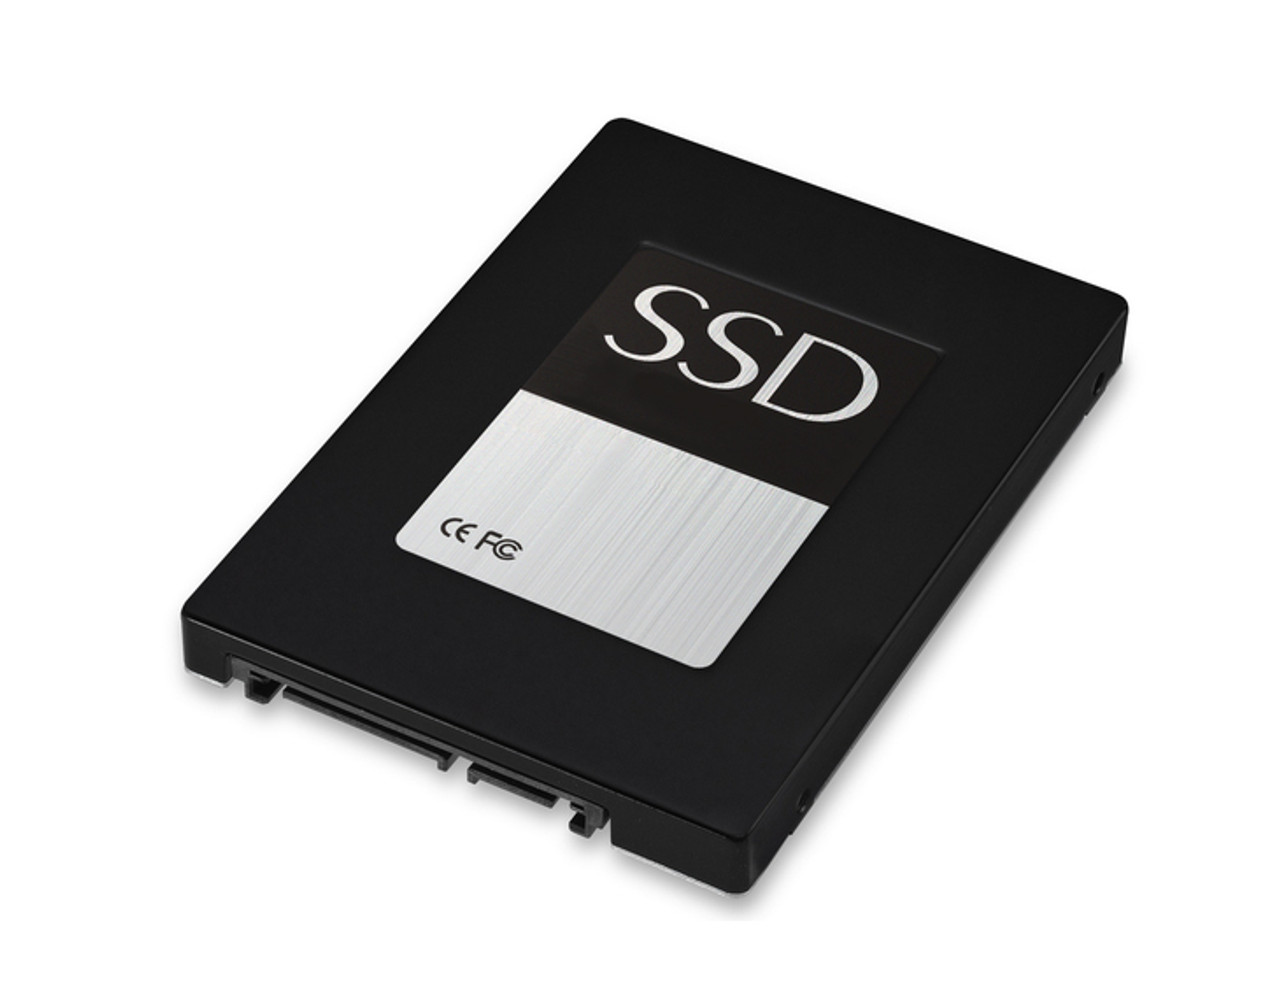 Irvine Sata 2.5 128 Gb Ssd Internal Solid State Drive Sata 3 Iii Durable  Storage Device | Read/Write Speed - 550/440 Mb/S | 6 Gb/S for Laptop